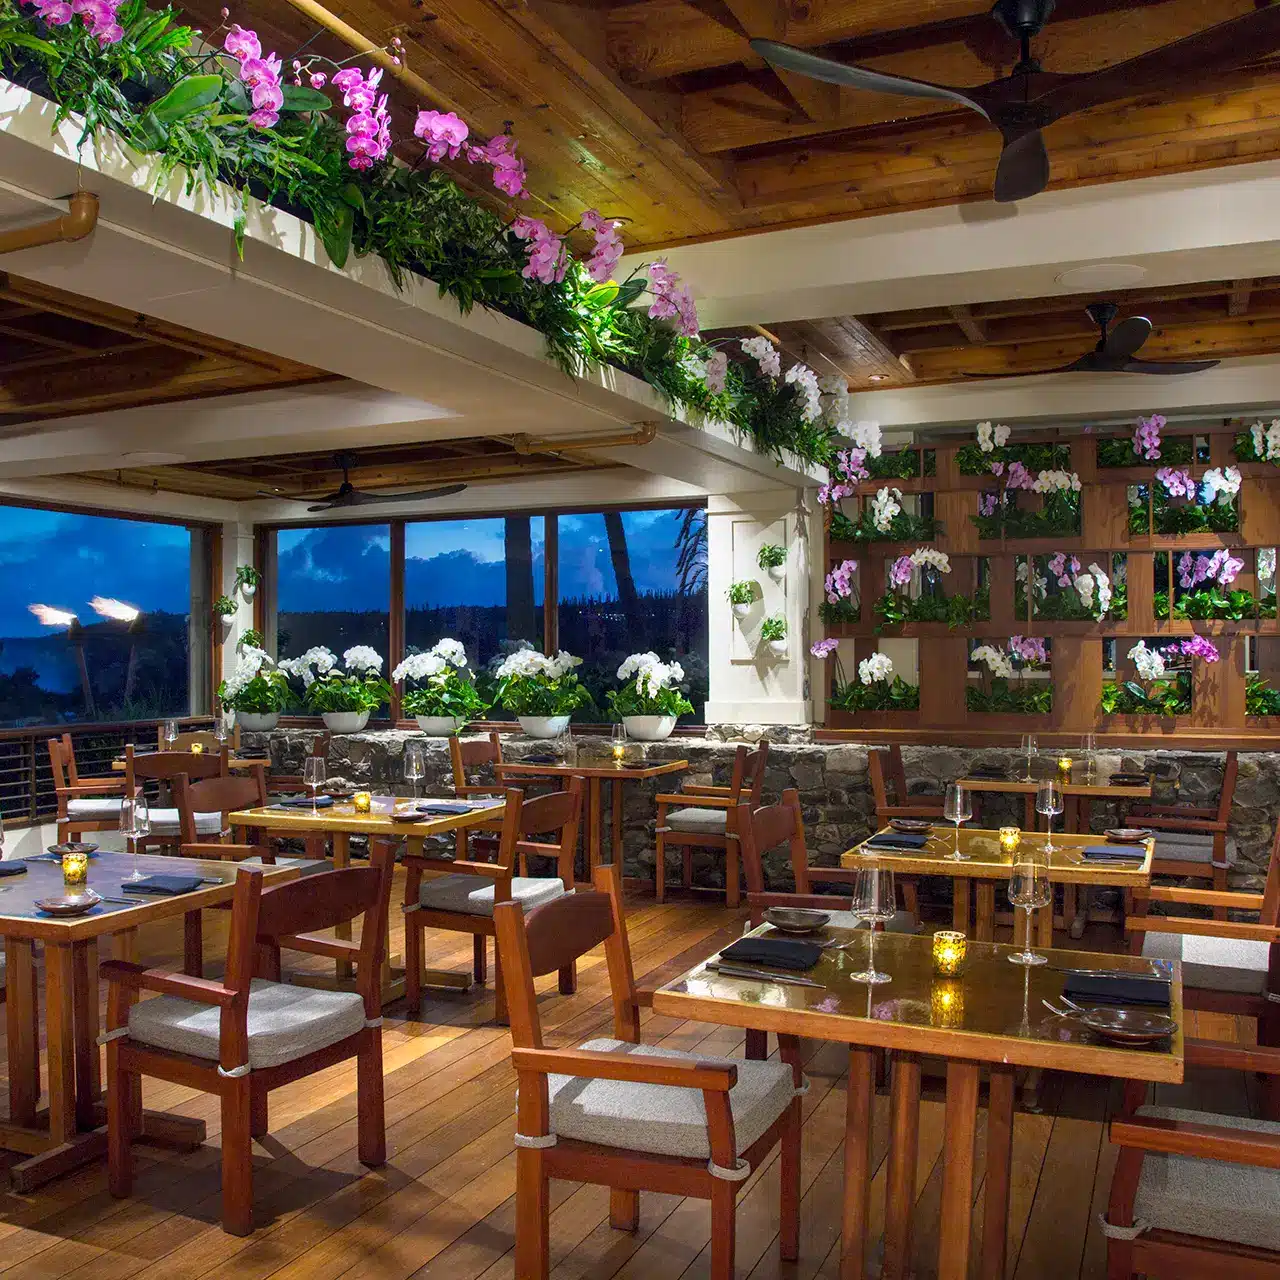 Banyan Tree is a Restaurant located in the city of Kapalua on Maui, Hawaii